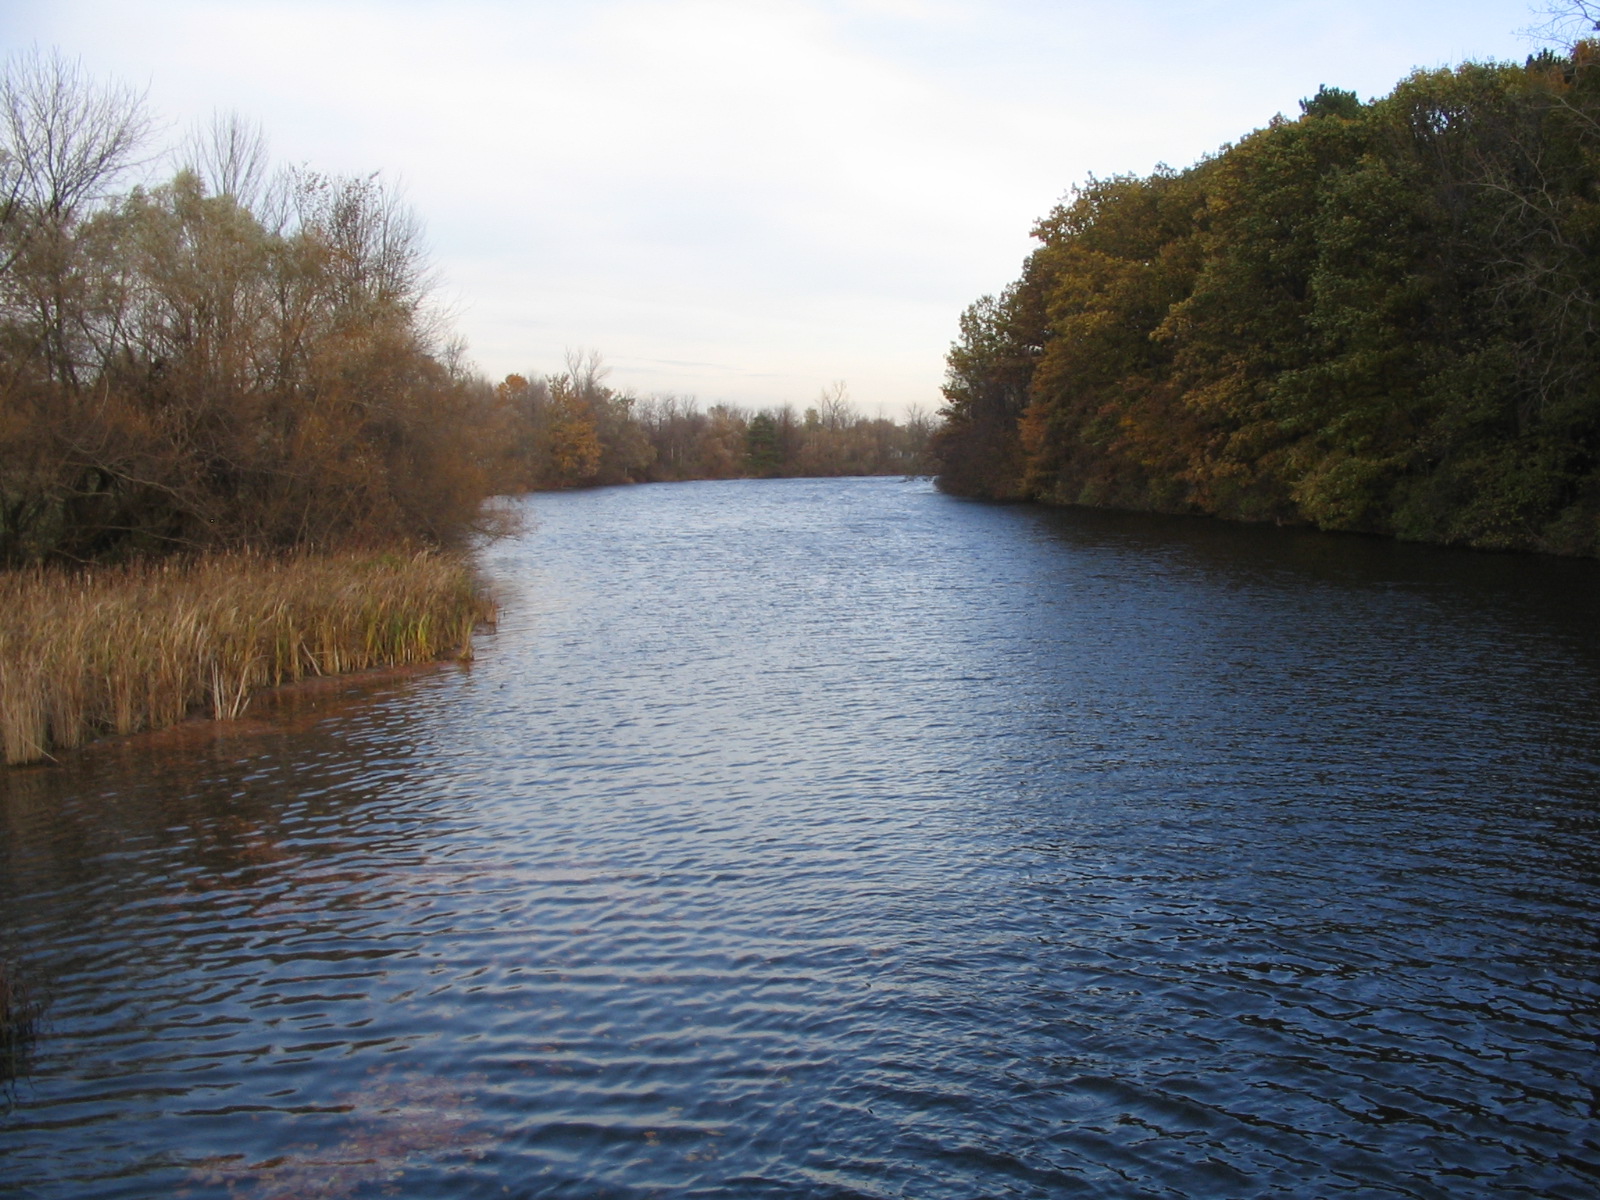 Photograph of the Black Creek at Churchville, NY (CHRN6) looking downstream